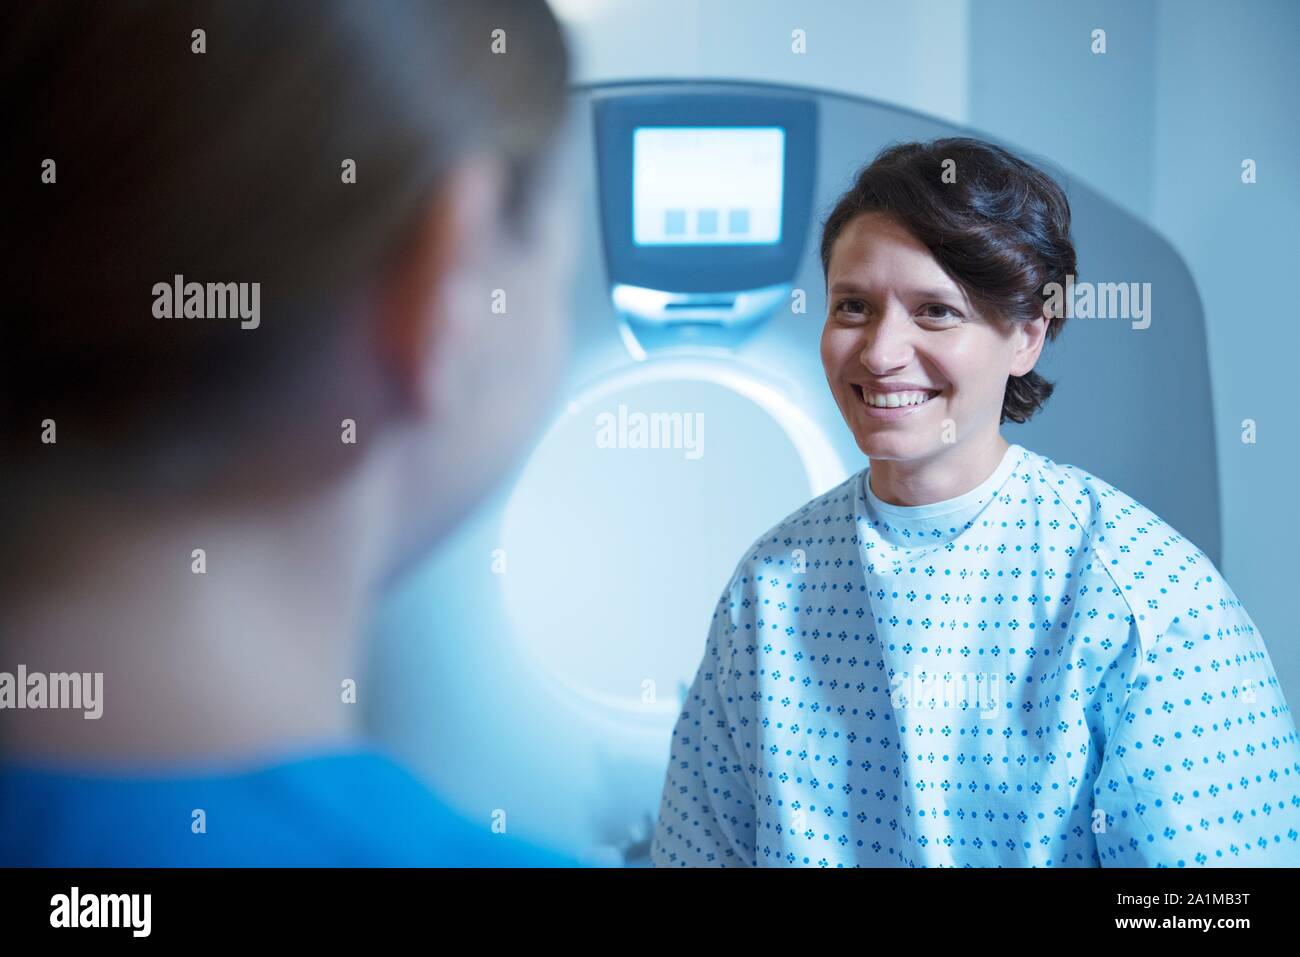 Radiographer preparing patient for computed tomography (CT) scan. Stock Photo